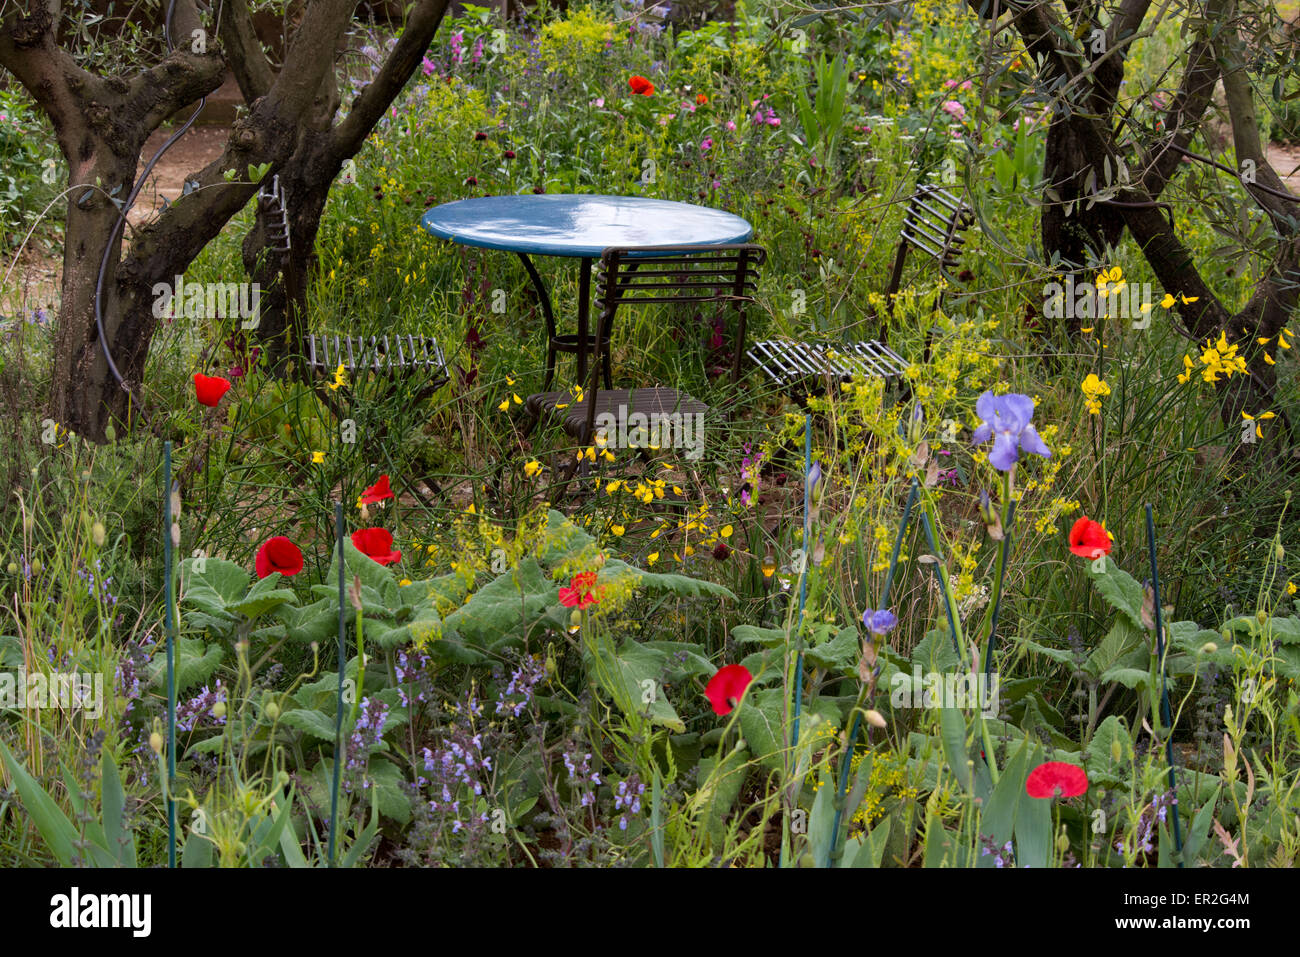 A Perfumer's Garden in Grasse at The Chelsea Flower Show sponsored by L'Occitane. Stock Photo